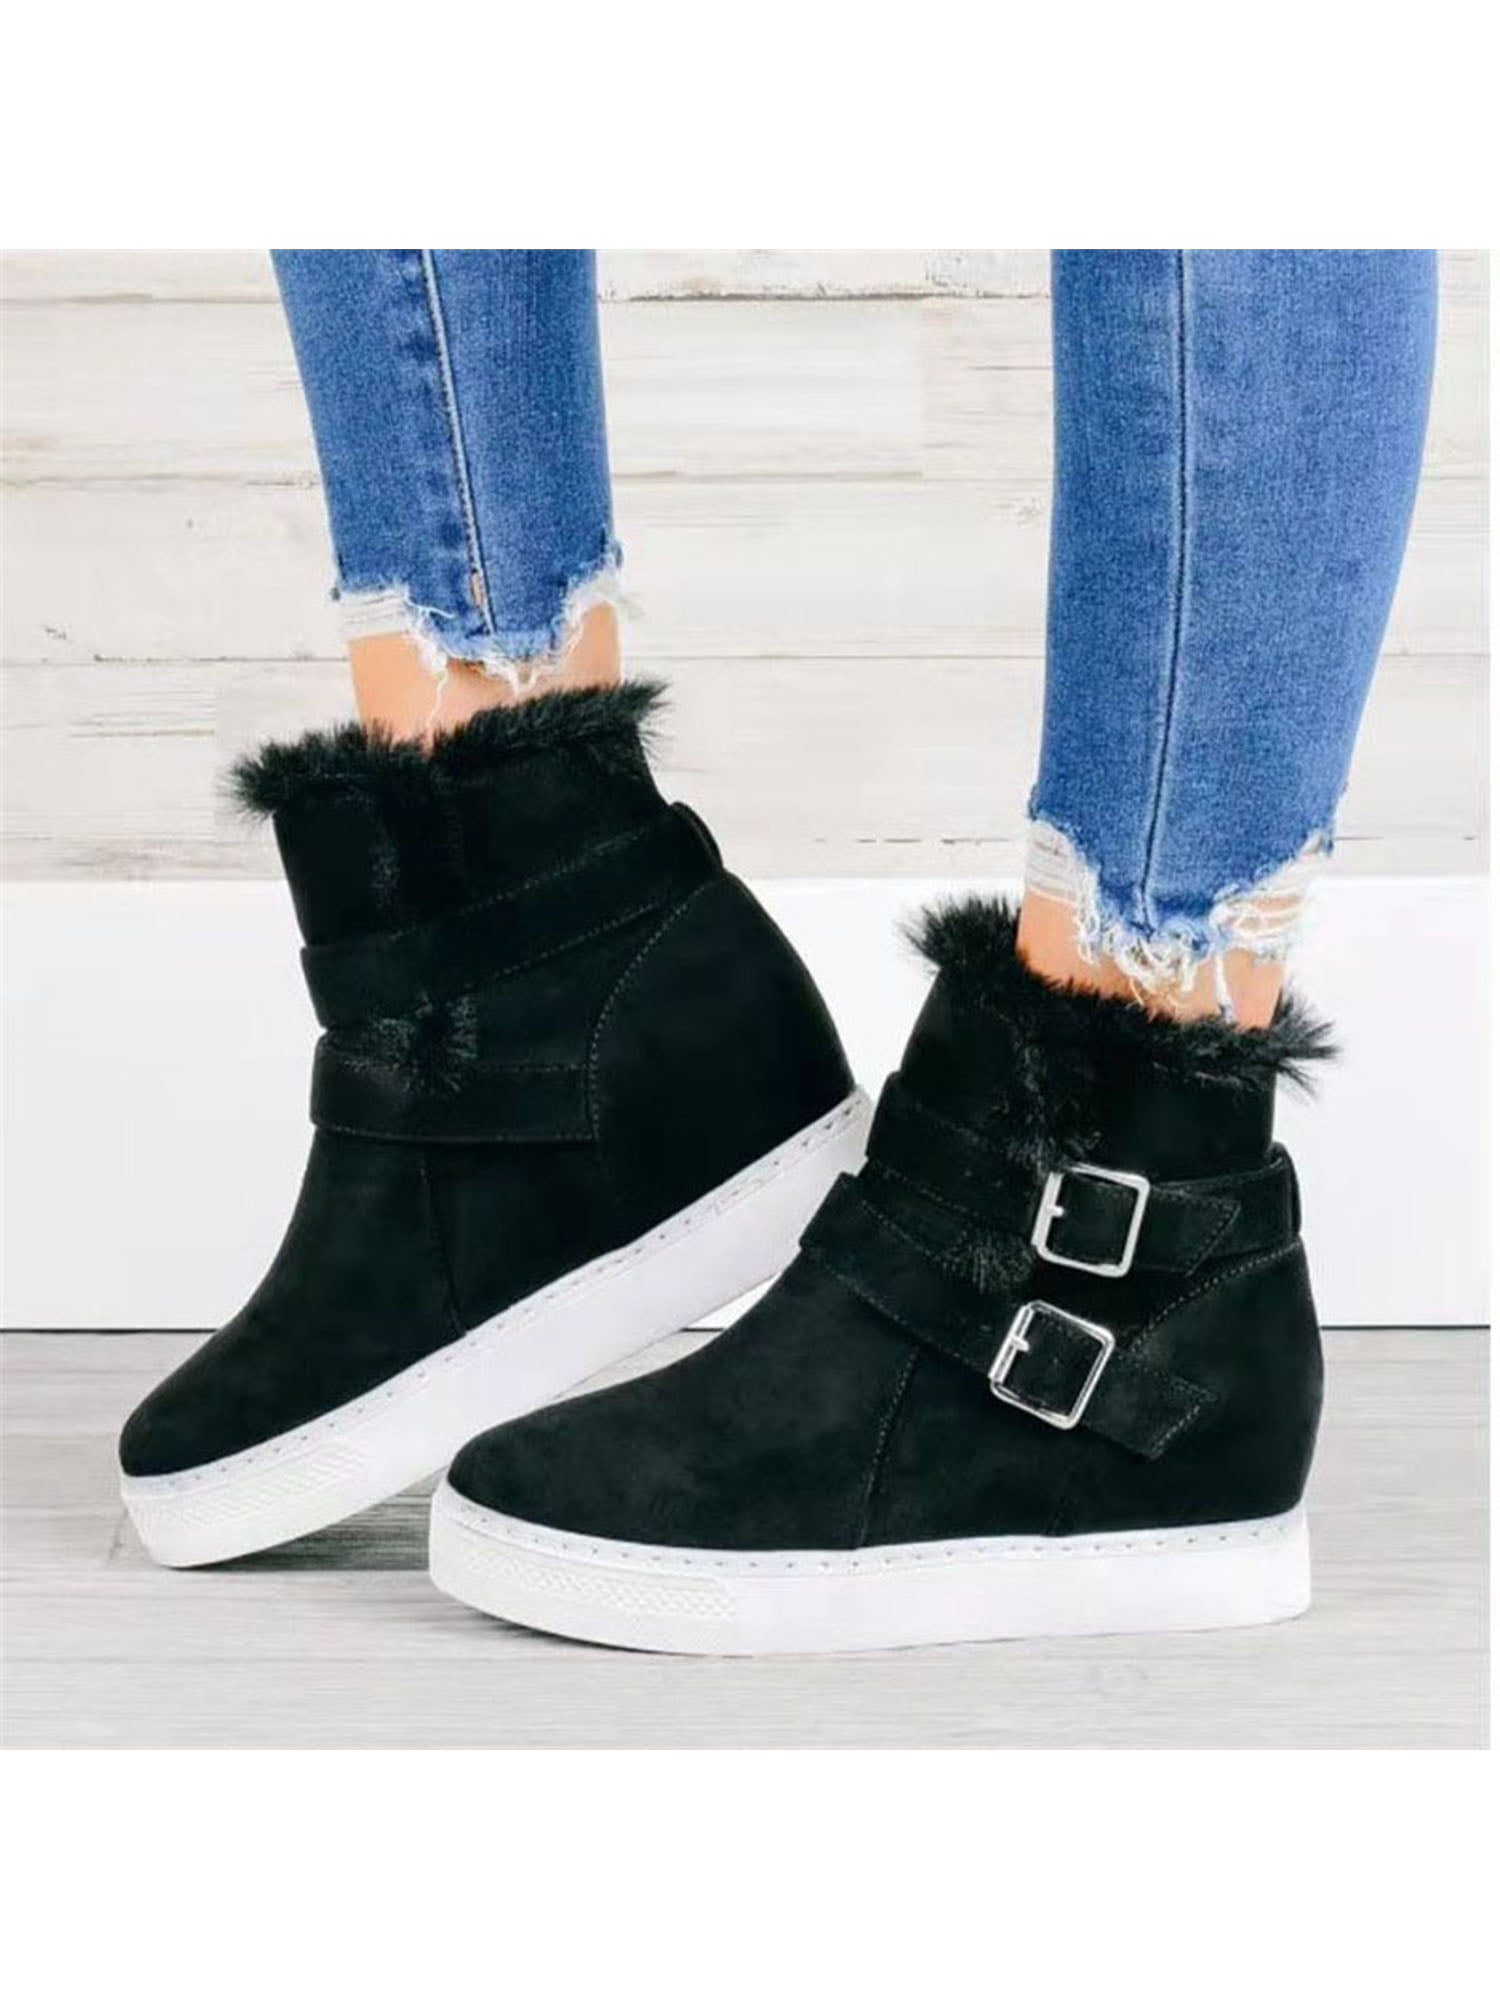 Womens Lace Up Wedge Platform Sneakers Fashion Hidden Heels Casual Buckle Shoes 